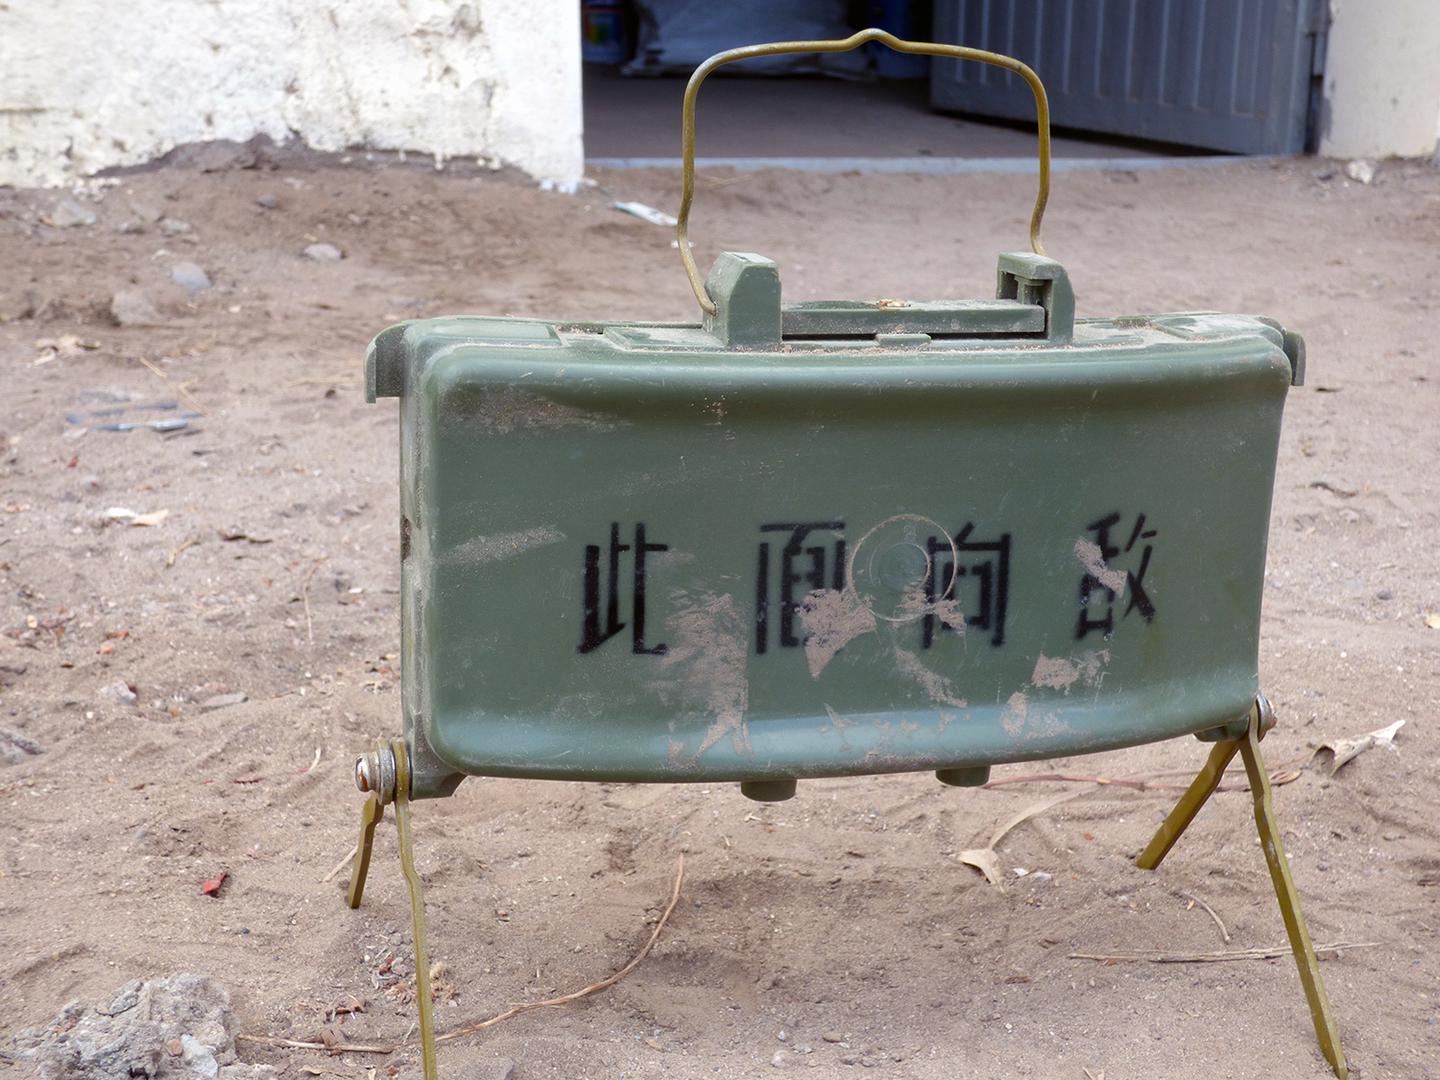 A Claymore-type mine with Chinese-language markings (“This side faces the enemy”) demined from Suqiya, Taizz governorate in February 2016 after Houthi-Saleh forces withdrew from the area. Deminers in Marib also said they found dozens of these mines in are